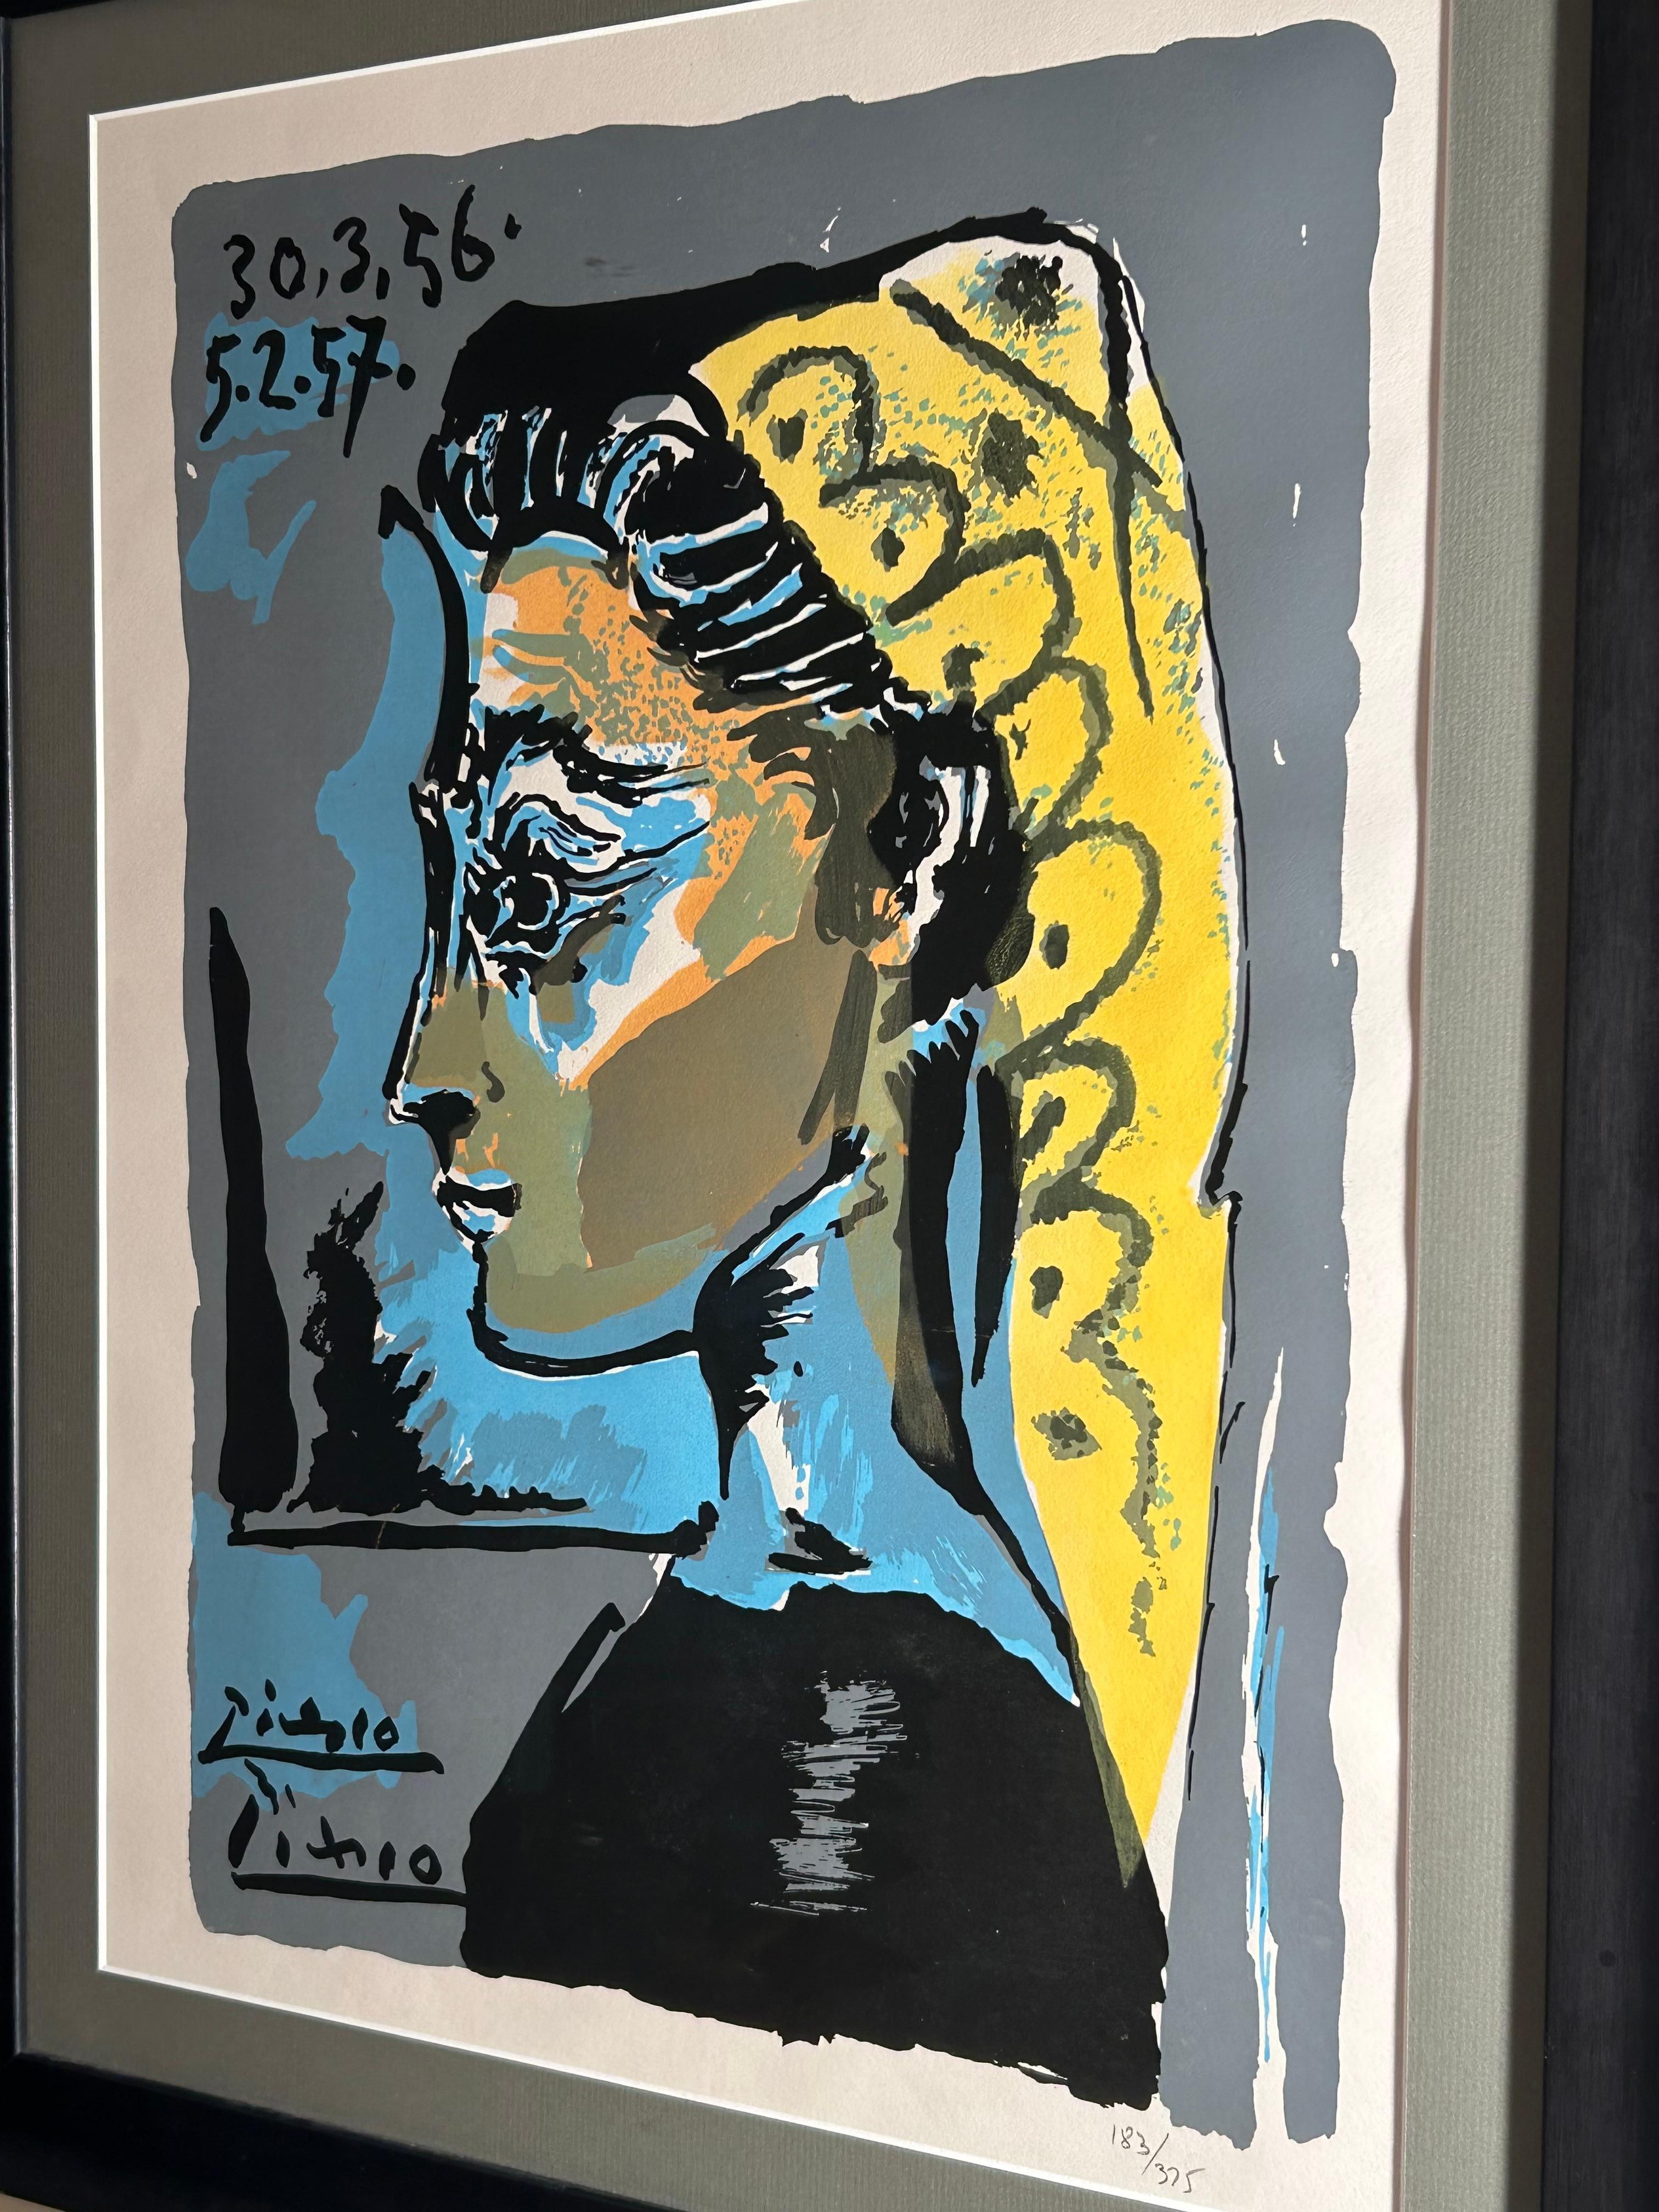 A beautiful depiction by Pablo Picasso of his final muse Jacqueline Roque with matted frame.
Hand numbered 183/375 as part of the limited series of lithograph's.
Lithograph dimensions: 21.5